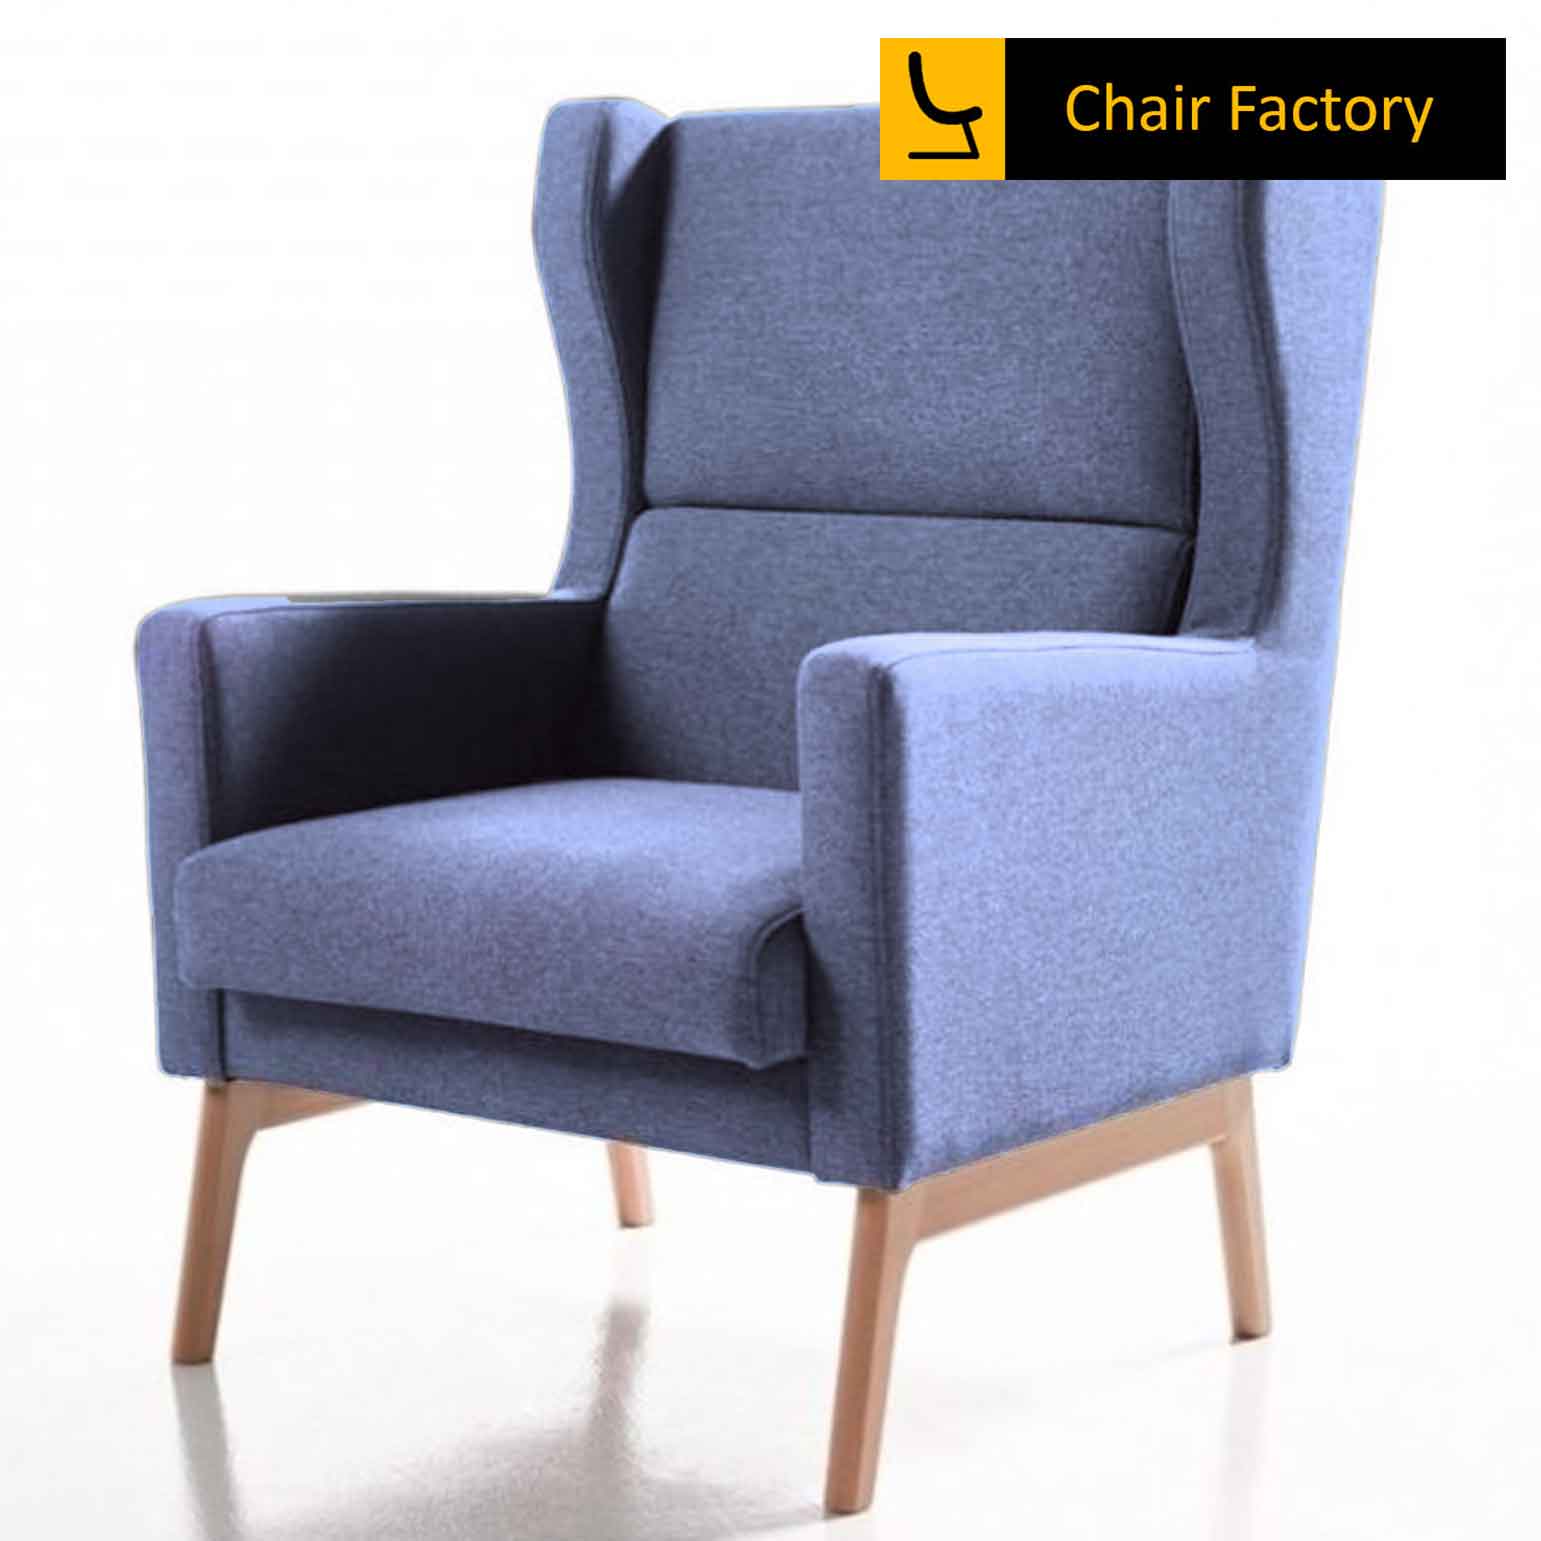 Watkins Blue Accent Chair With Handsupport